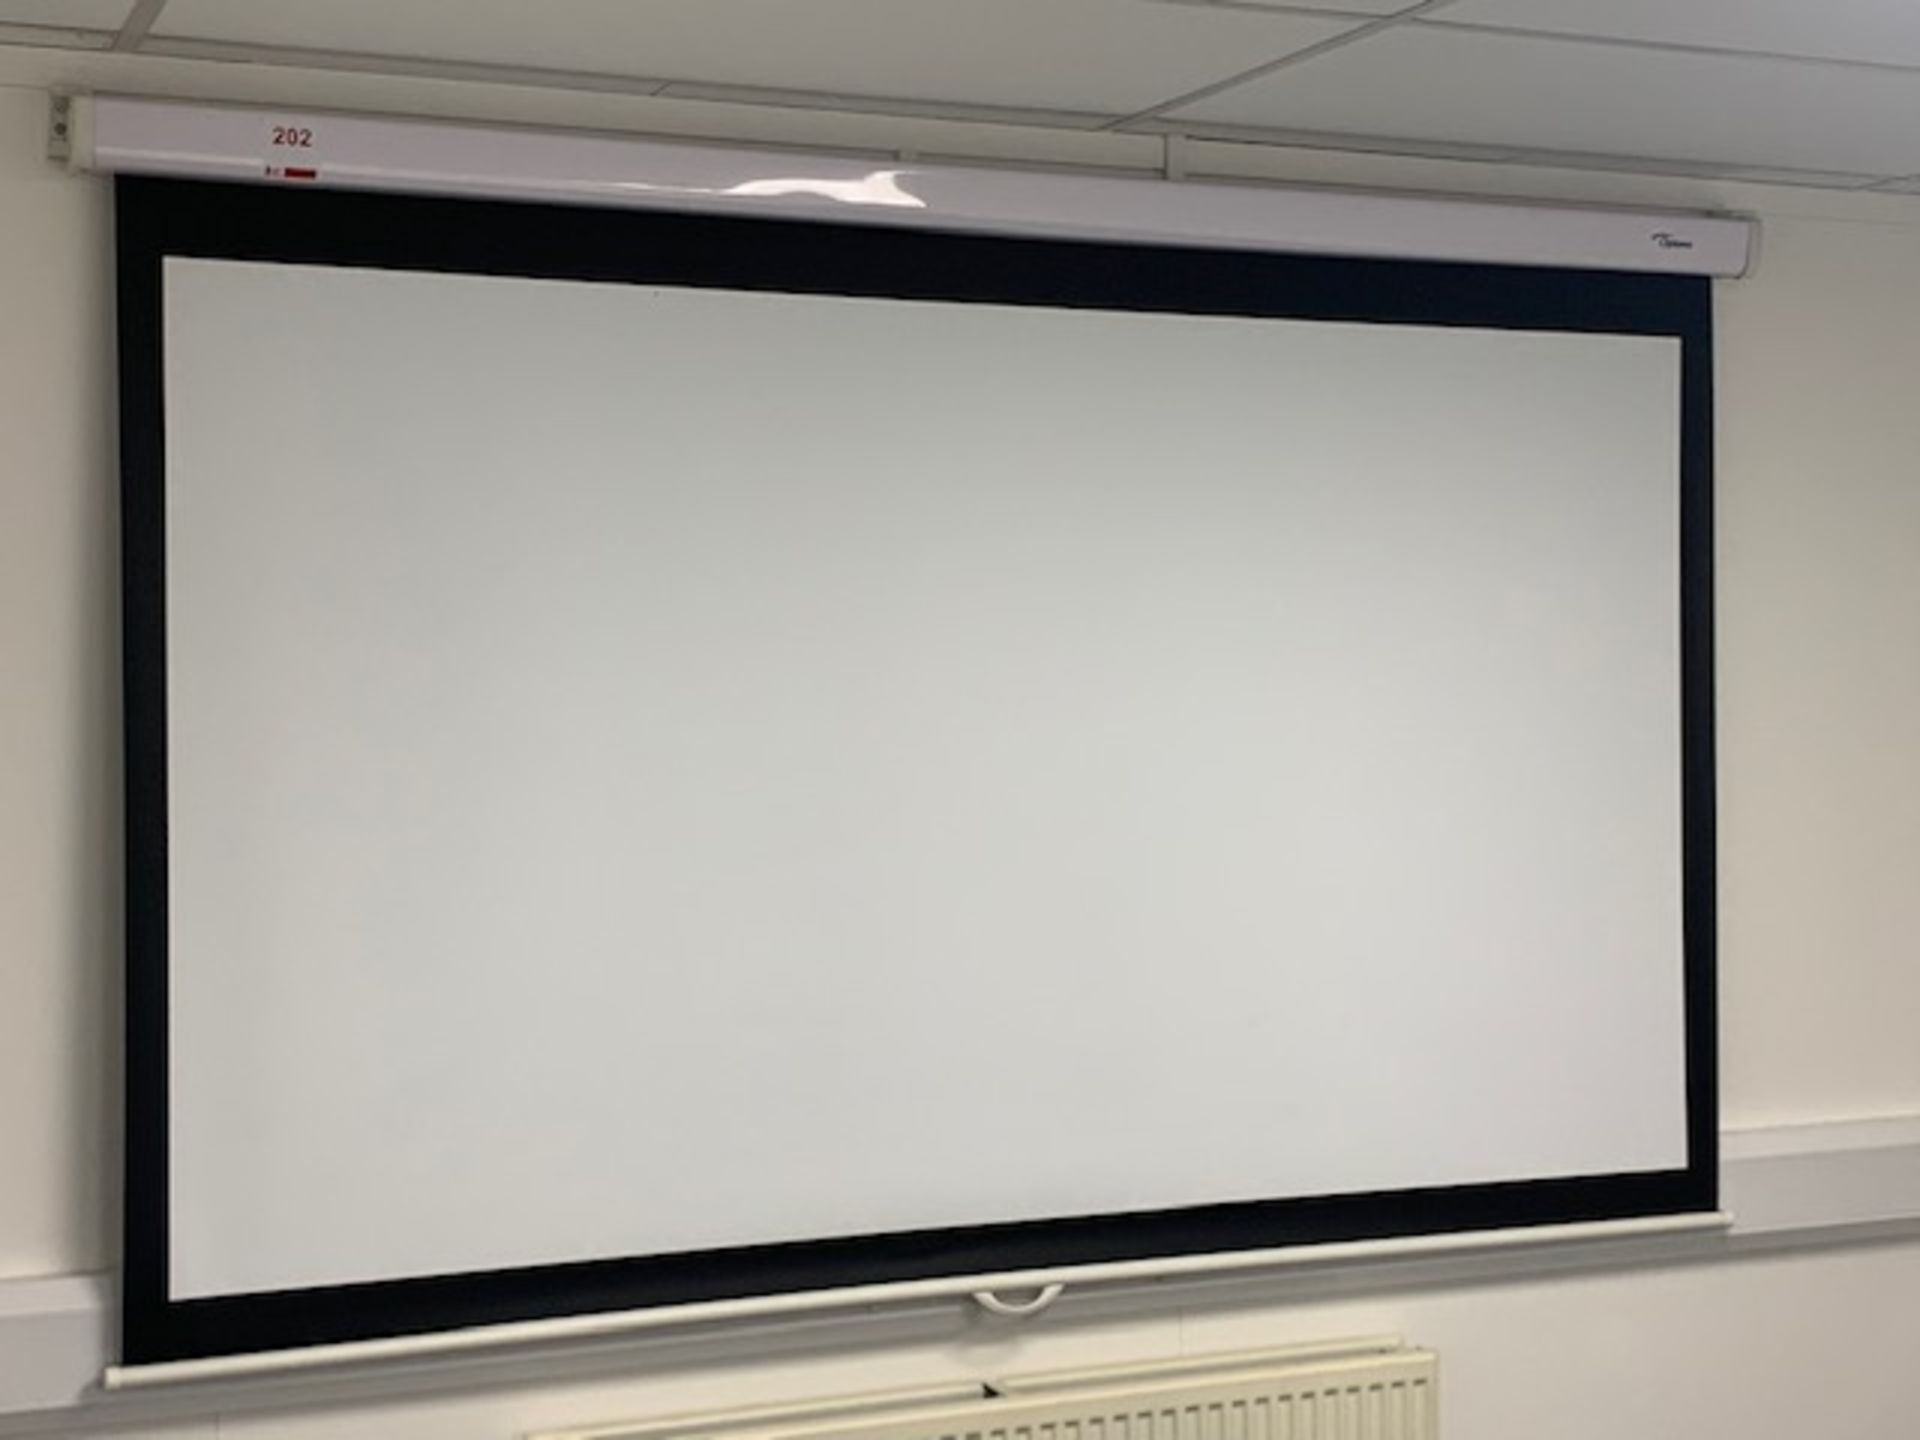 Benq Projector with remote and dongles c/w pull down screen, Model SH753 - Image 3 of 4